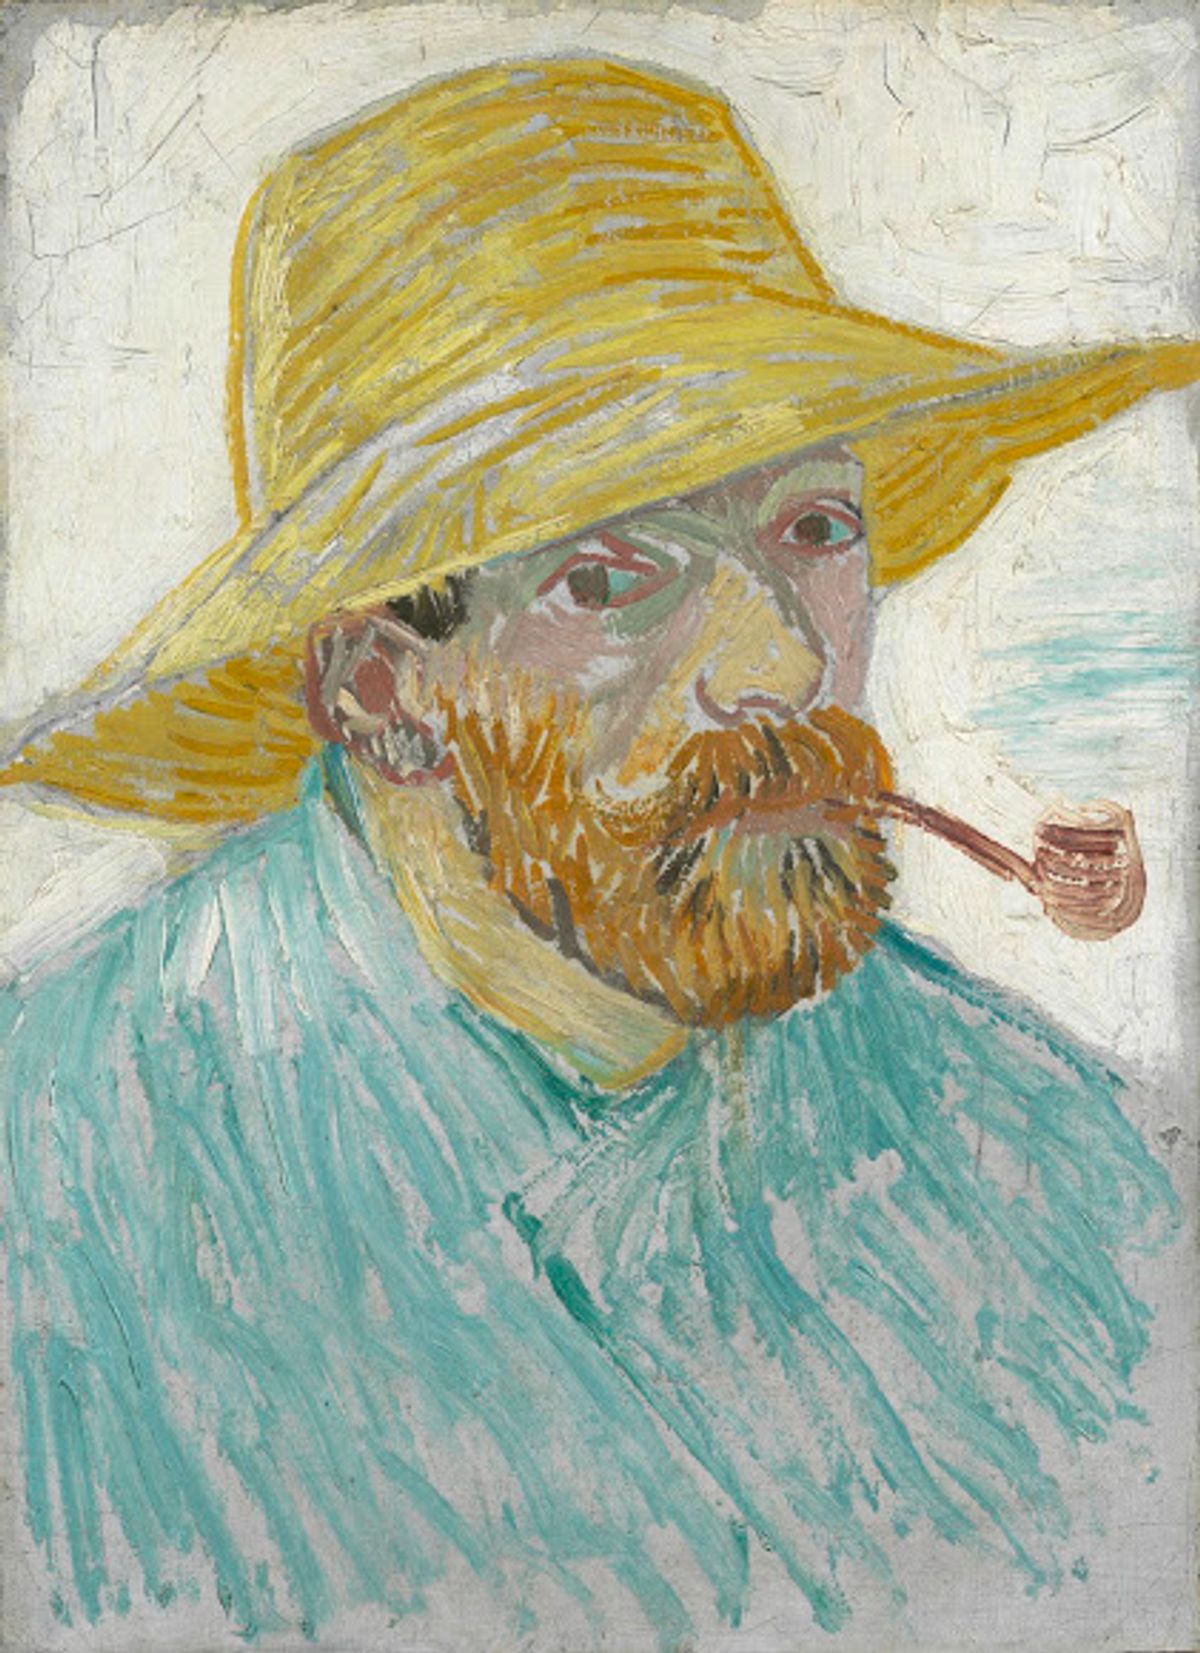 Vincent van Gogh’s Self-portrait with Pipe and Straw Hat (1887) Courtesy of the Van Gogh Museum, Amsterdam (Vincent van Gogh Foundation)